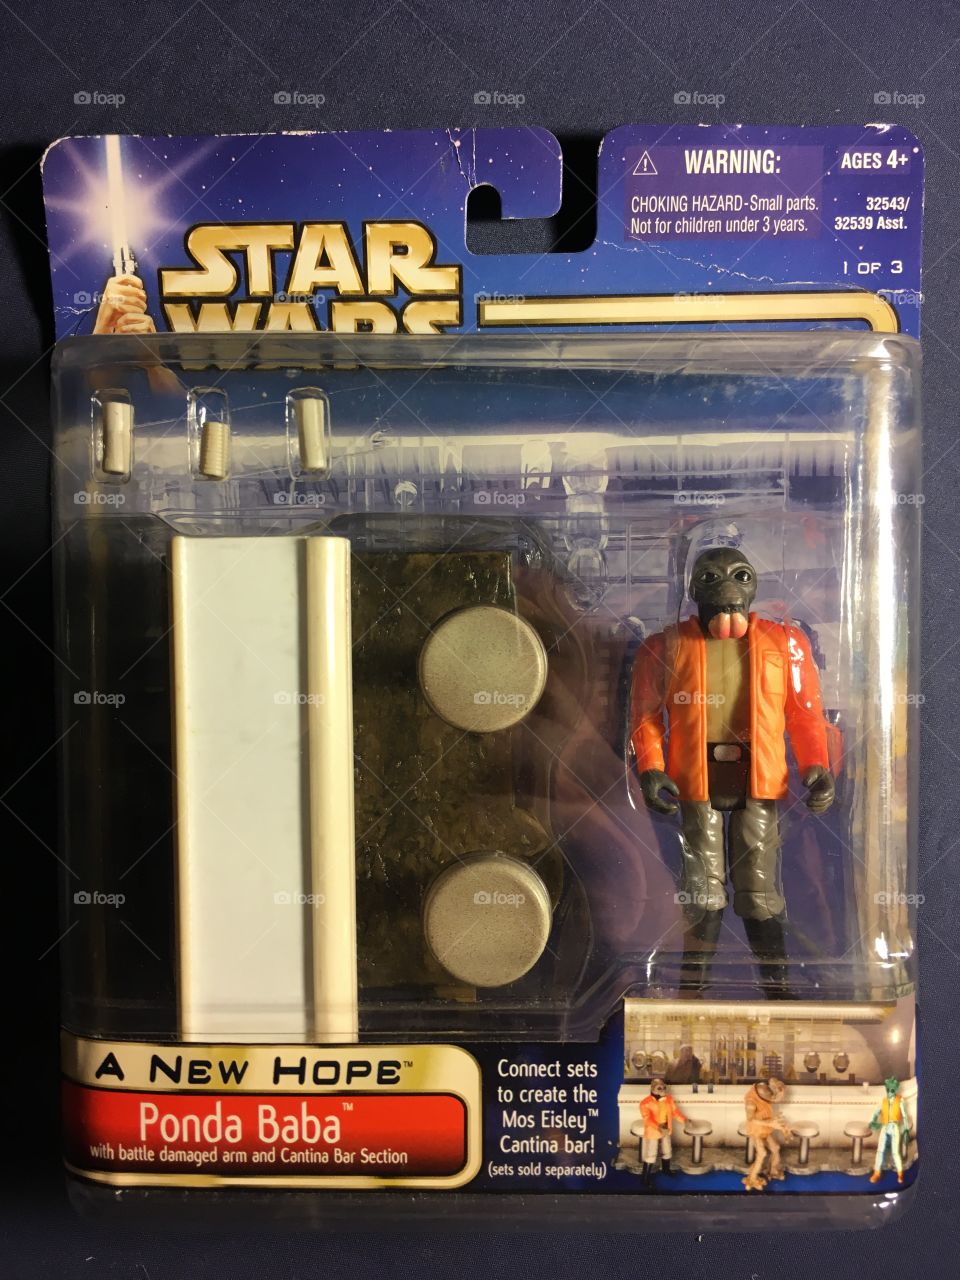 Star Wars - A New Hope 
Ponda Baba - With Battle Damaged Arm and Cantina Bar Section Released - 2002